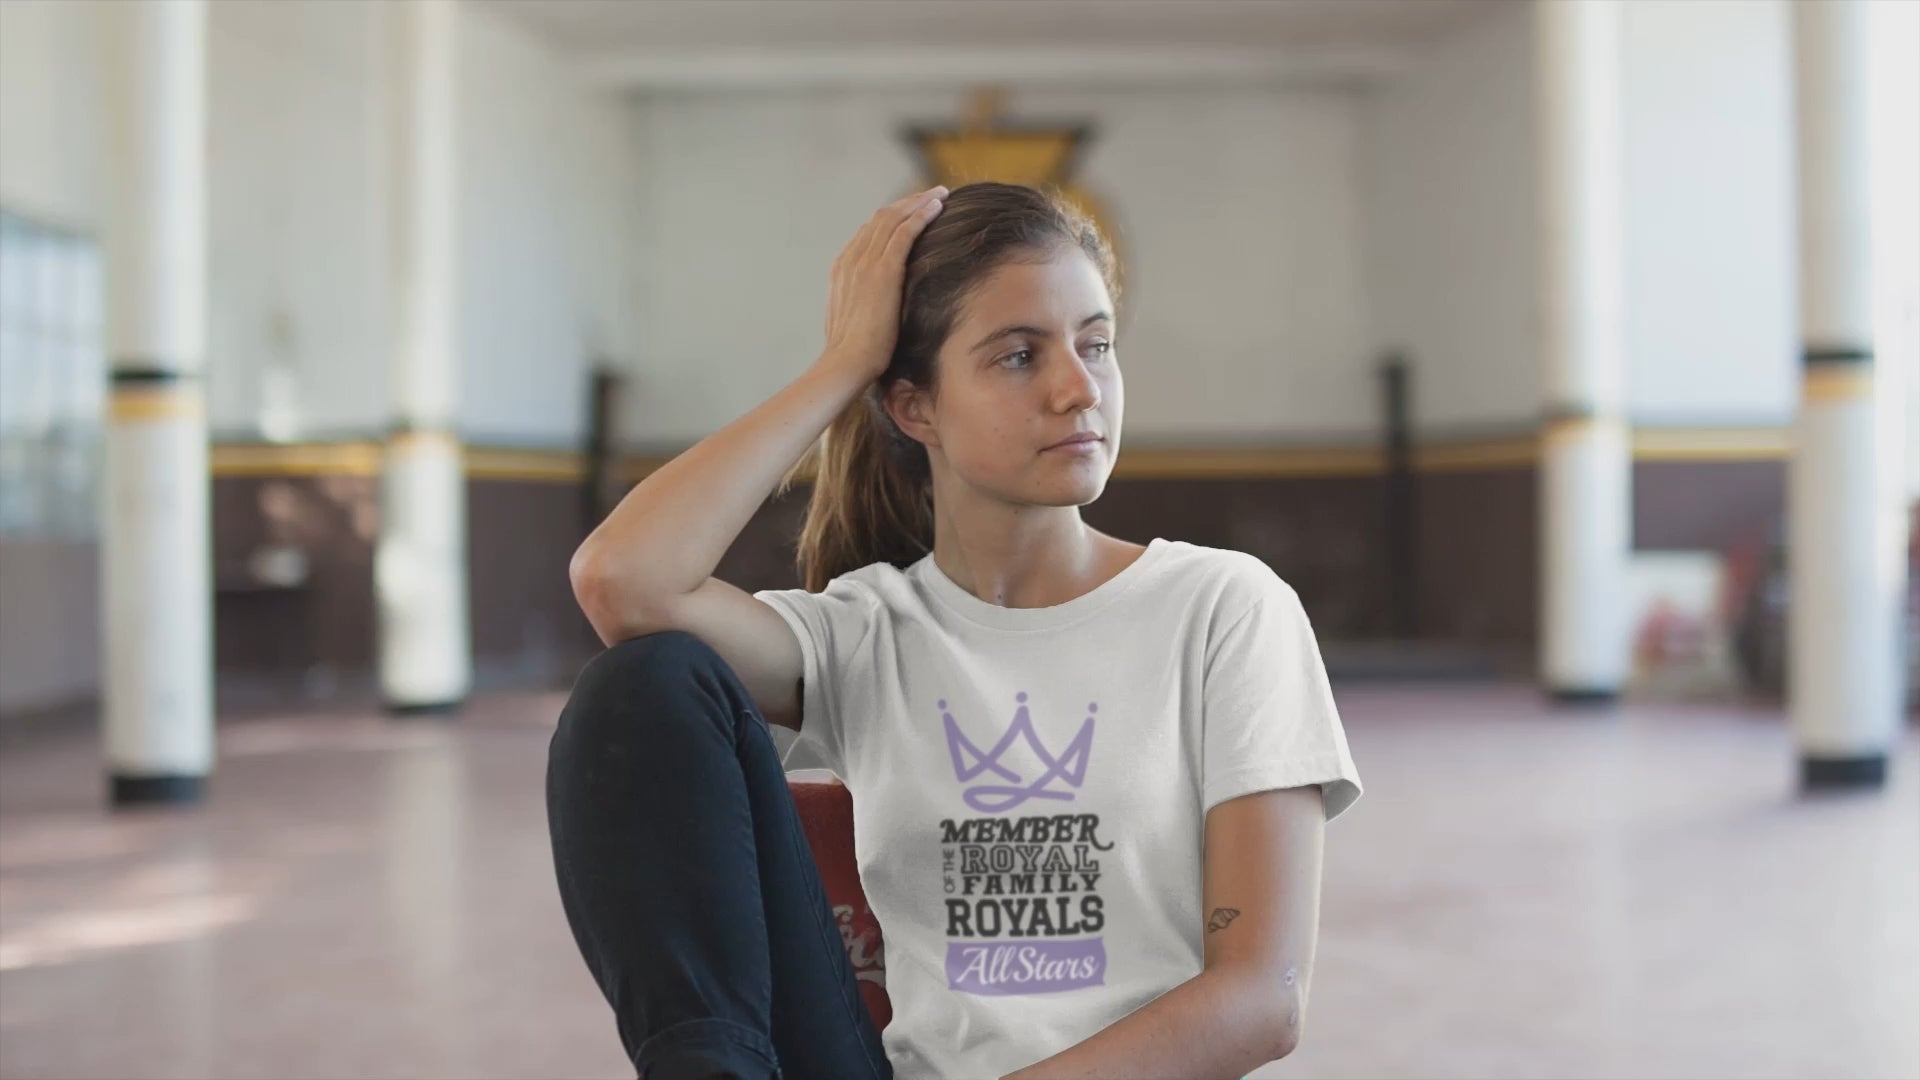 Load video: A young girl wearing a &#39;Member Of The Royal Family&#39; t-shirt